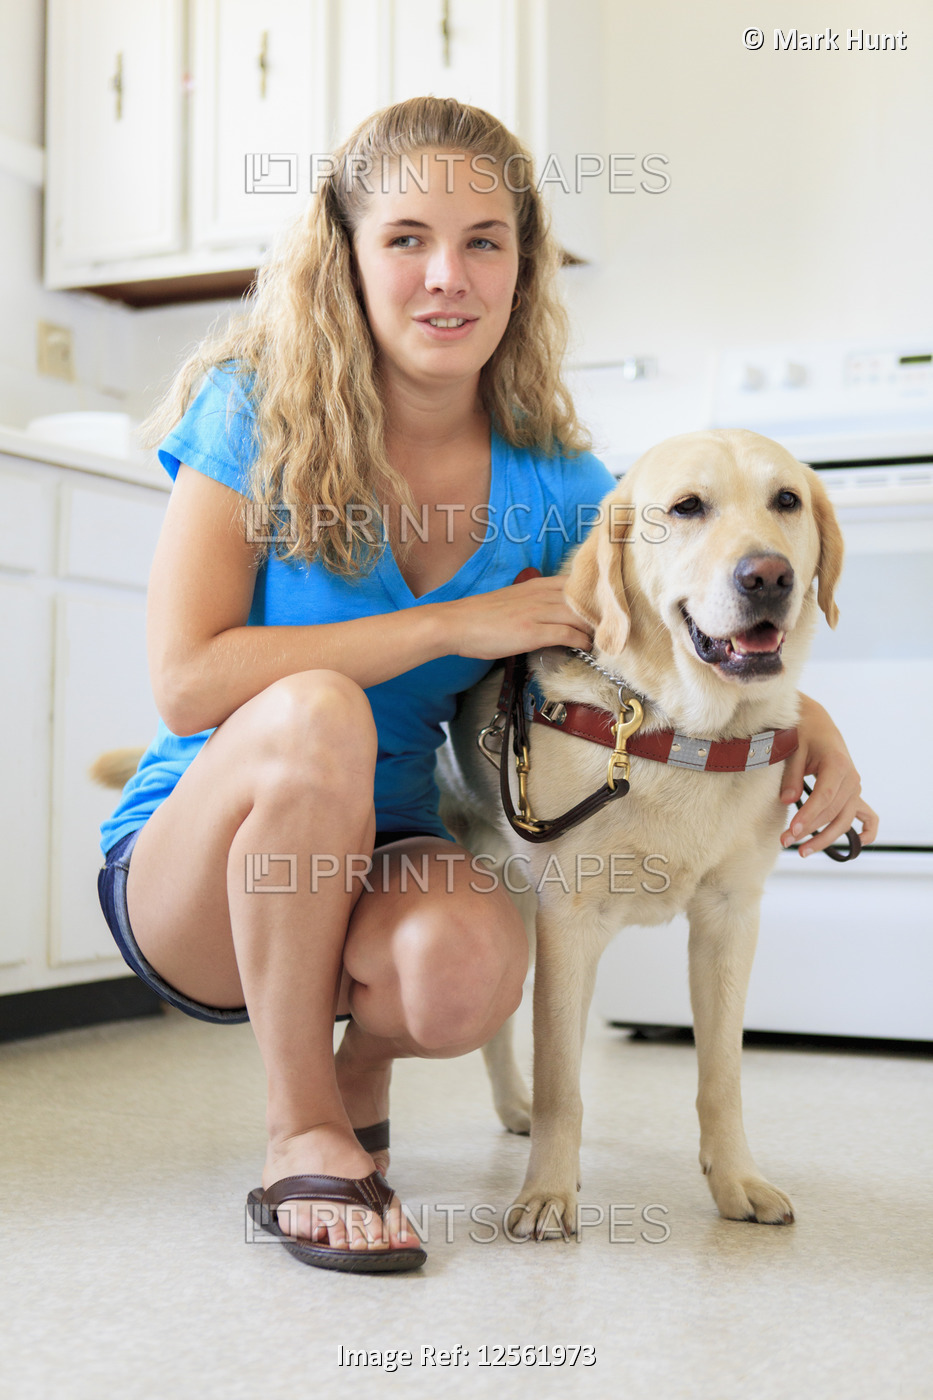 Woman with visual impairment in kitchen with her service dog